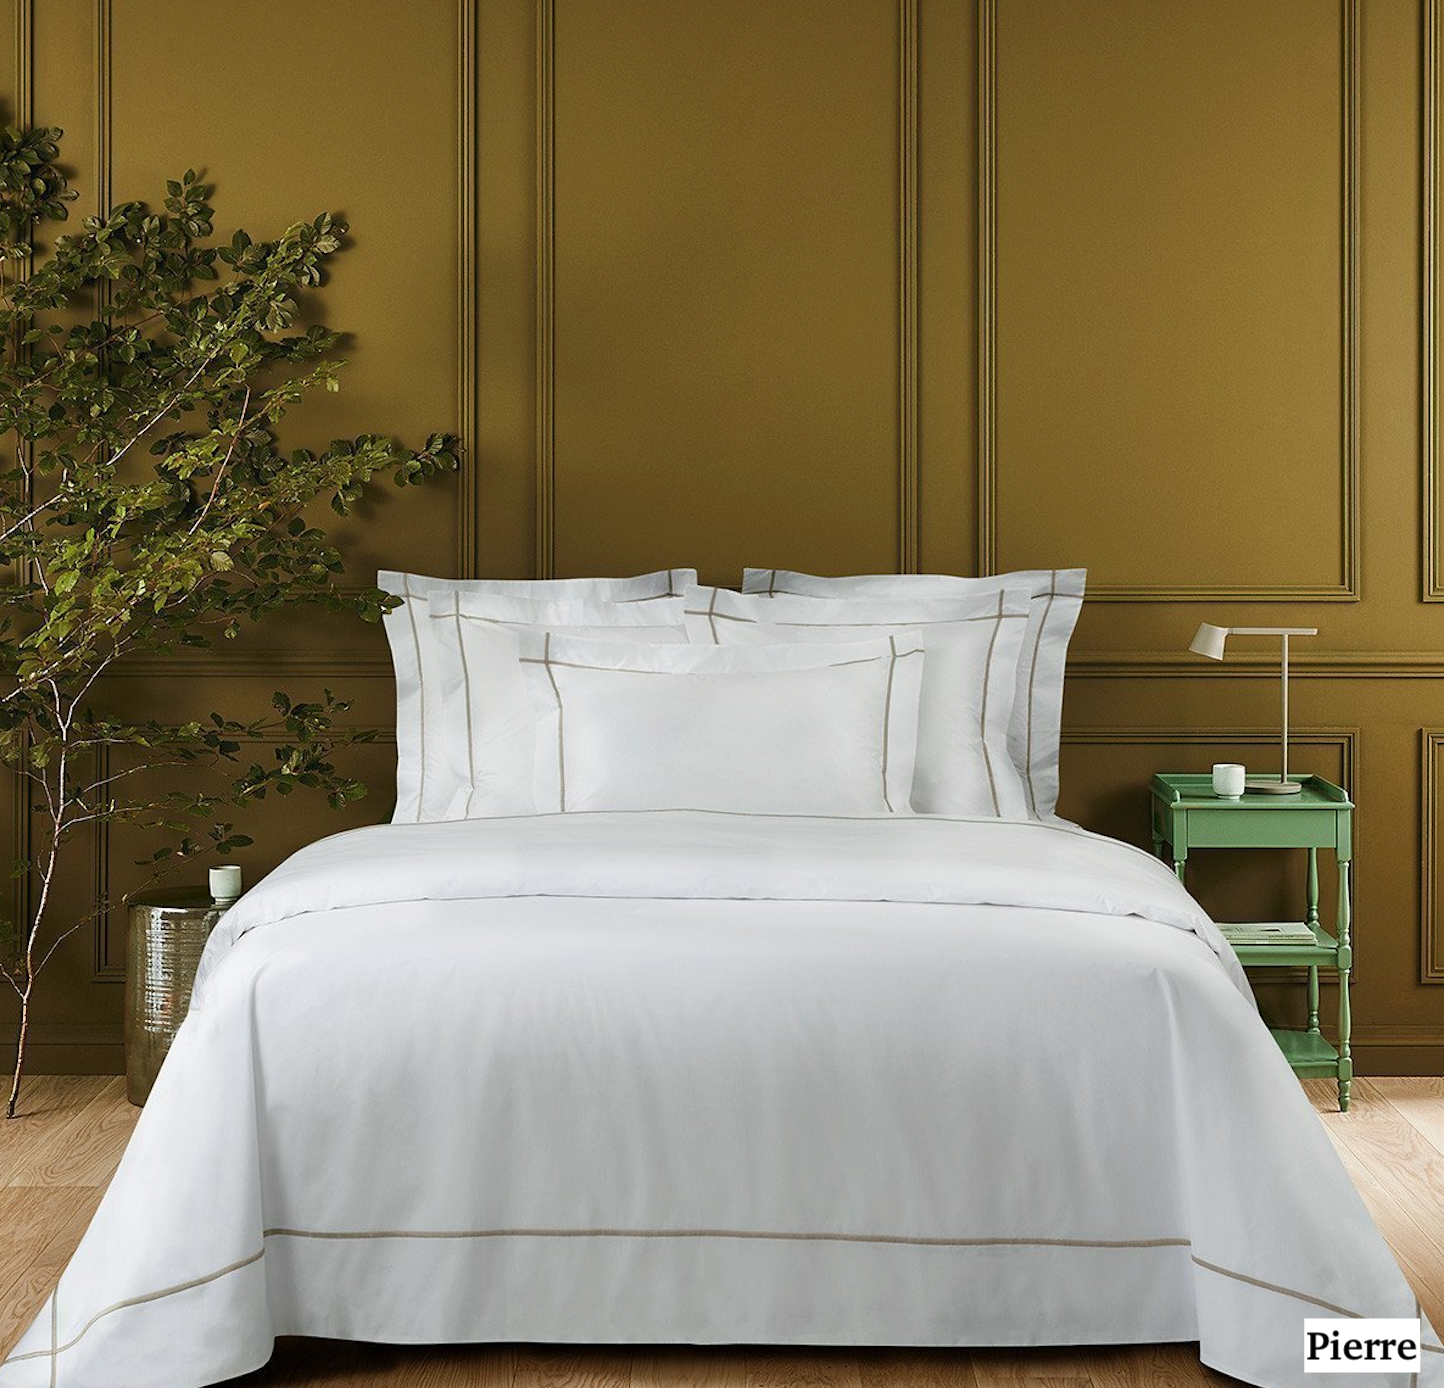 Athena bed collection by Yves Delorme